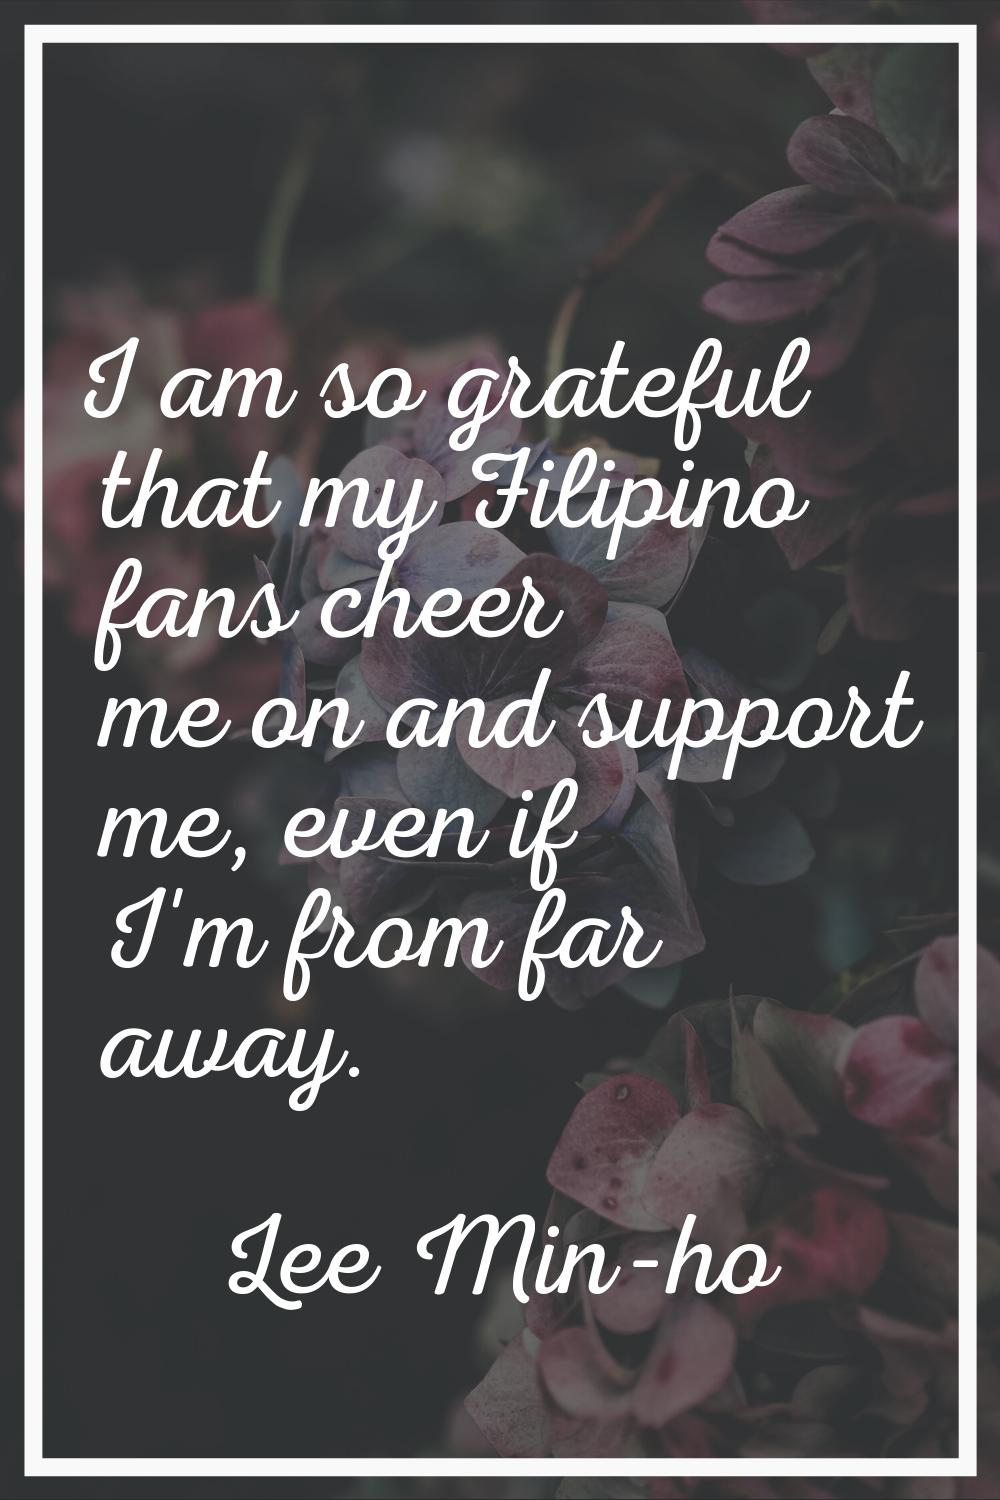 I am so grateful that my Filipino fans cheer me on and support me, even if I'm from far away.